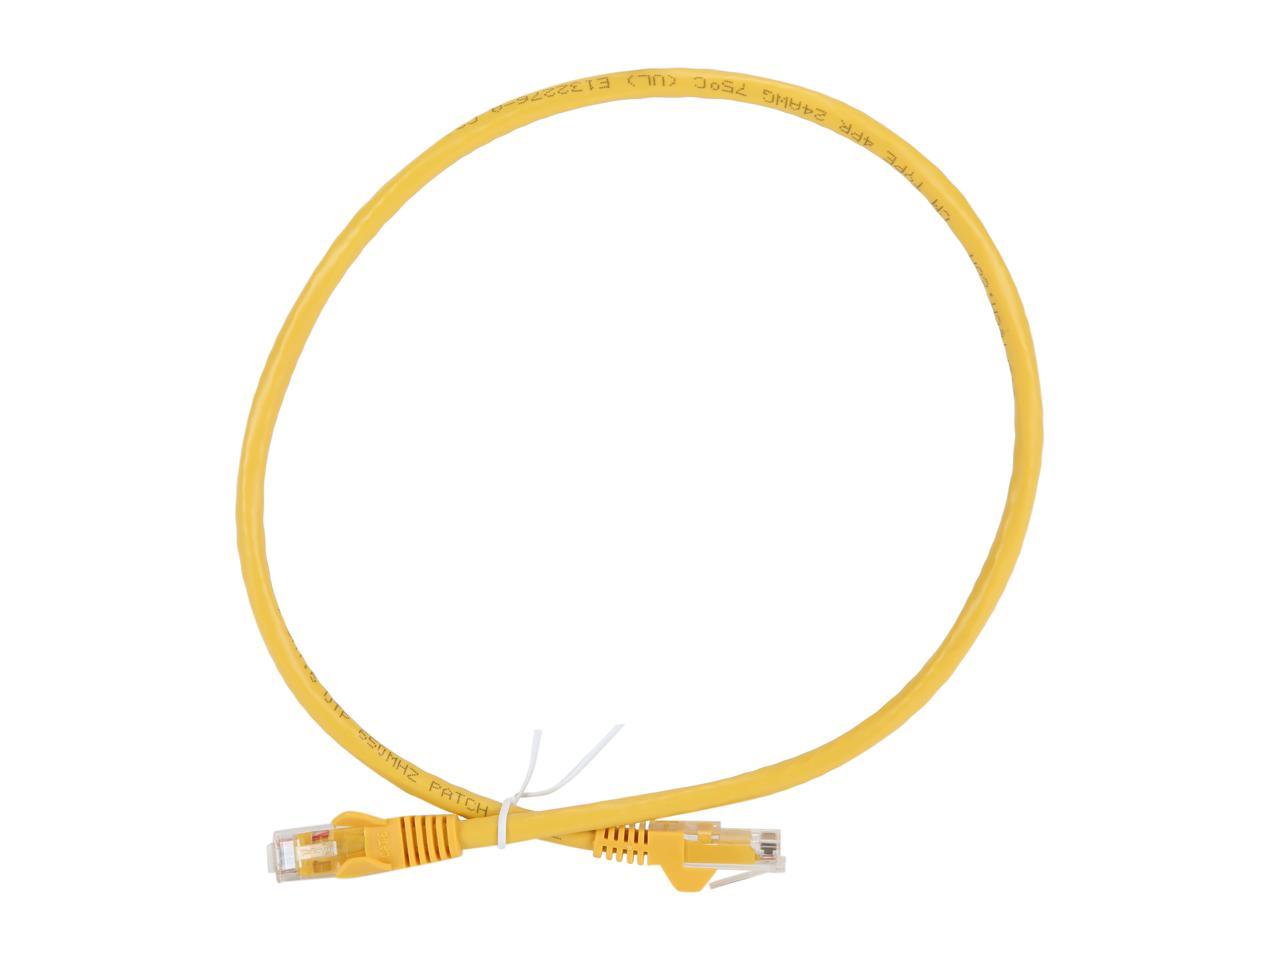 StarTech N6PATCH2YL StarTech.com Cat6 Patch Cable - 2 ft. - Yellow Ethernet Cable - Snagless RJ45 Cable - Ethernet Cord - Cat 6 Cable - 2 ft.